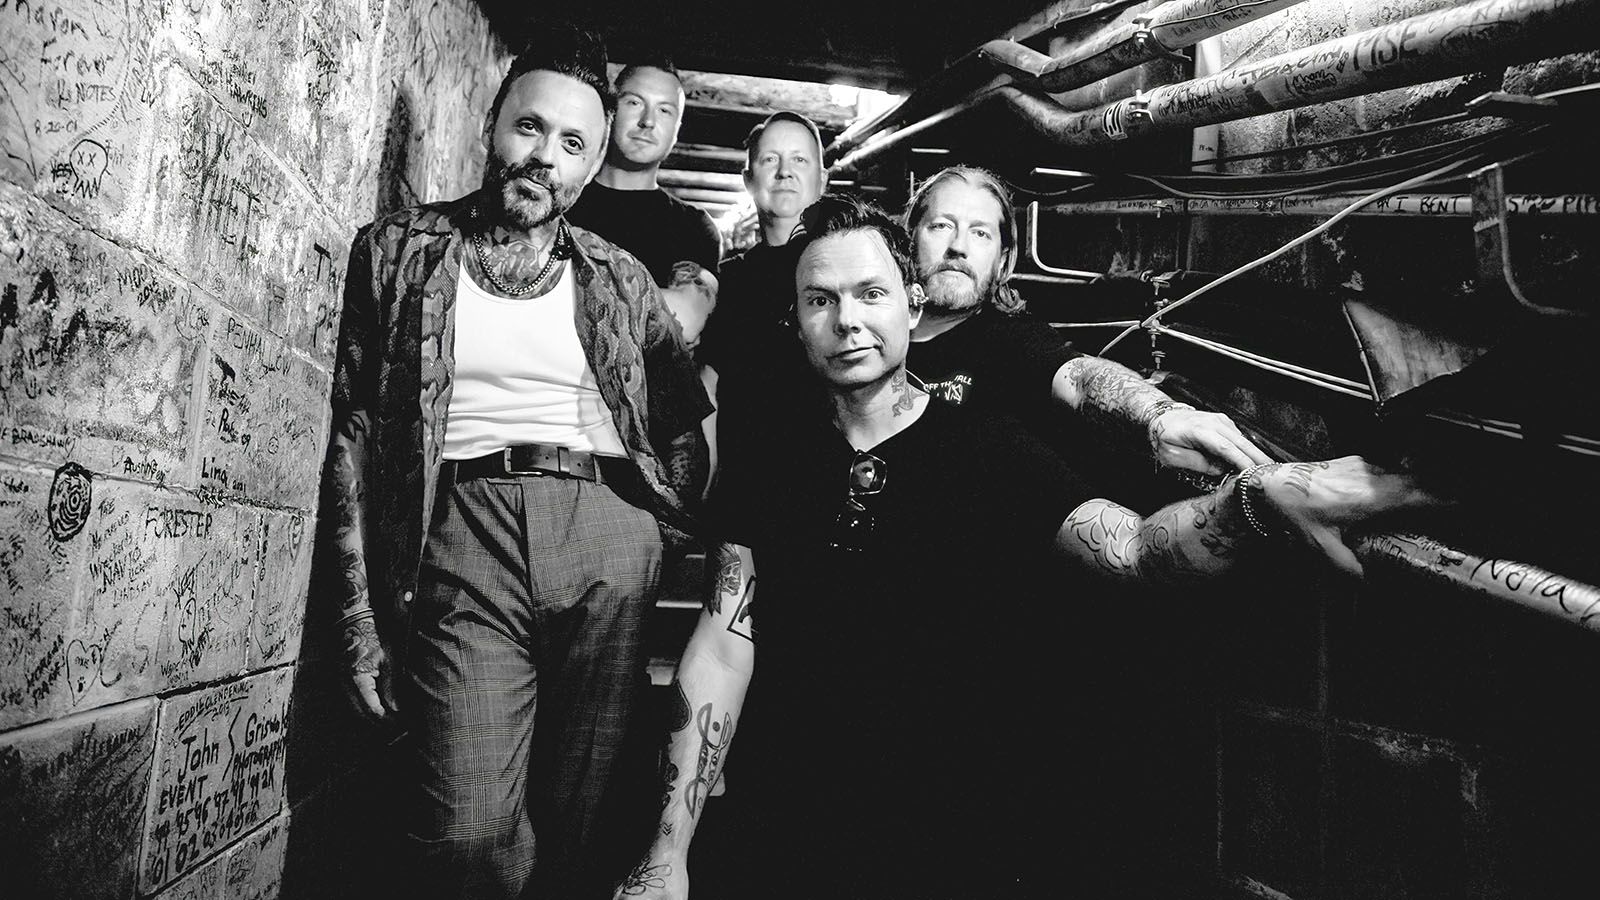 Blue October will be stopping by The Clyde Theatre on Thursday, March 9, with opening act Beatnik Bandits.